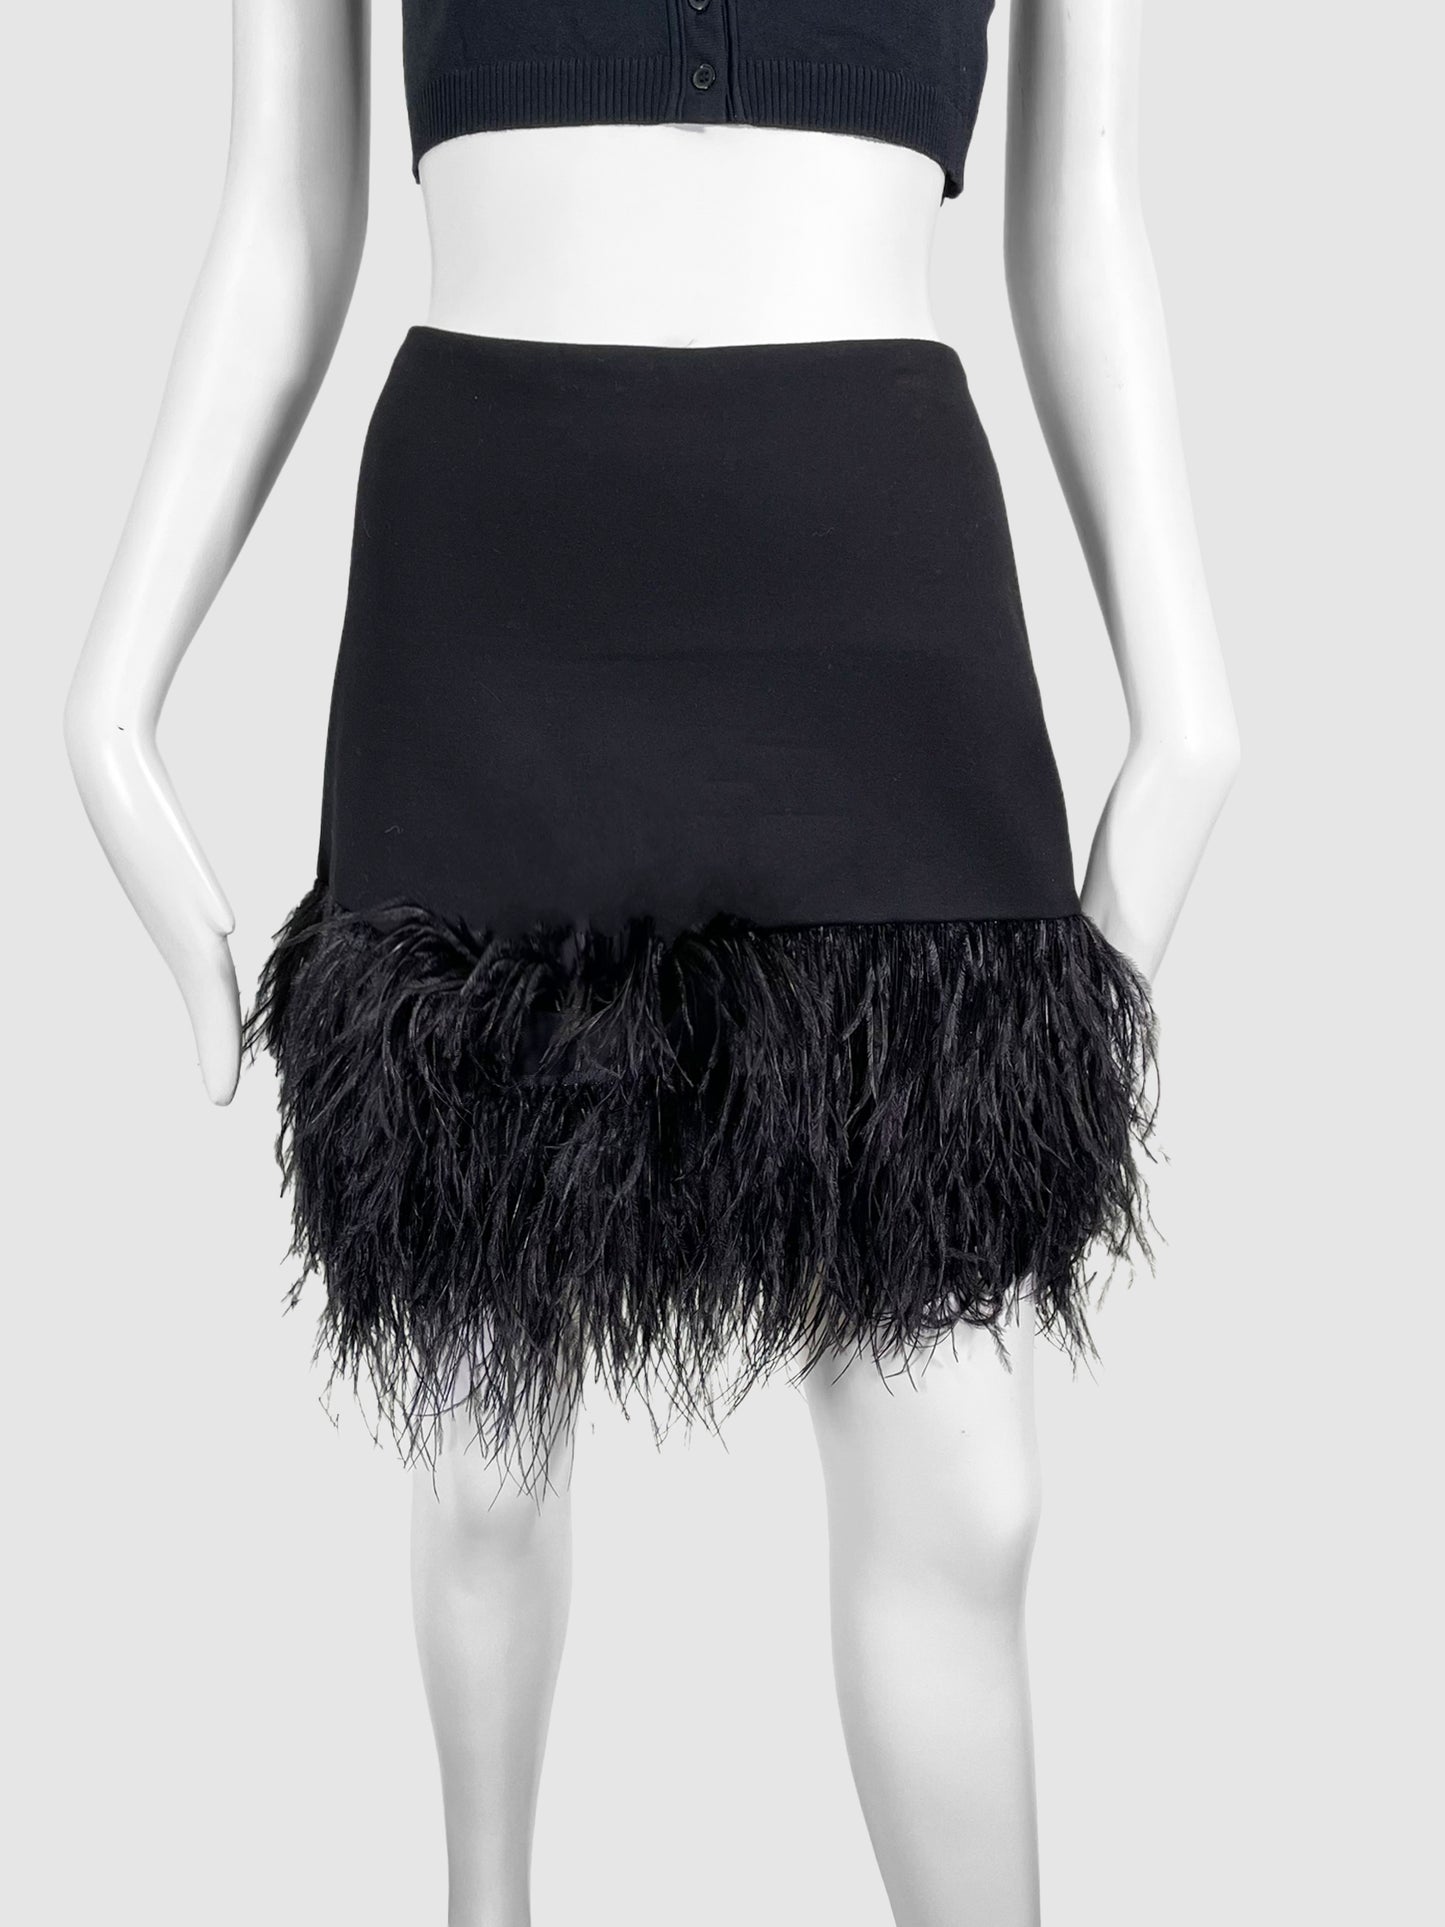 Polo Ralph Lauren Mini Skirt with Feather Trimming - Size 6